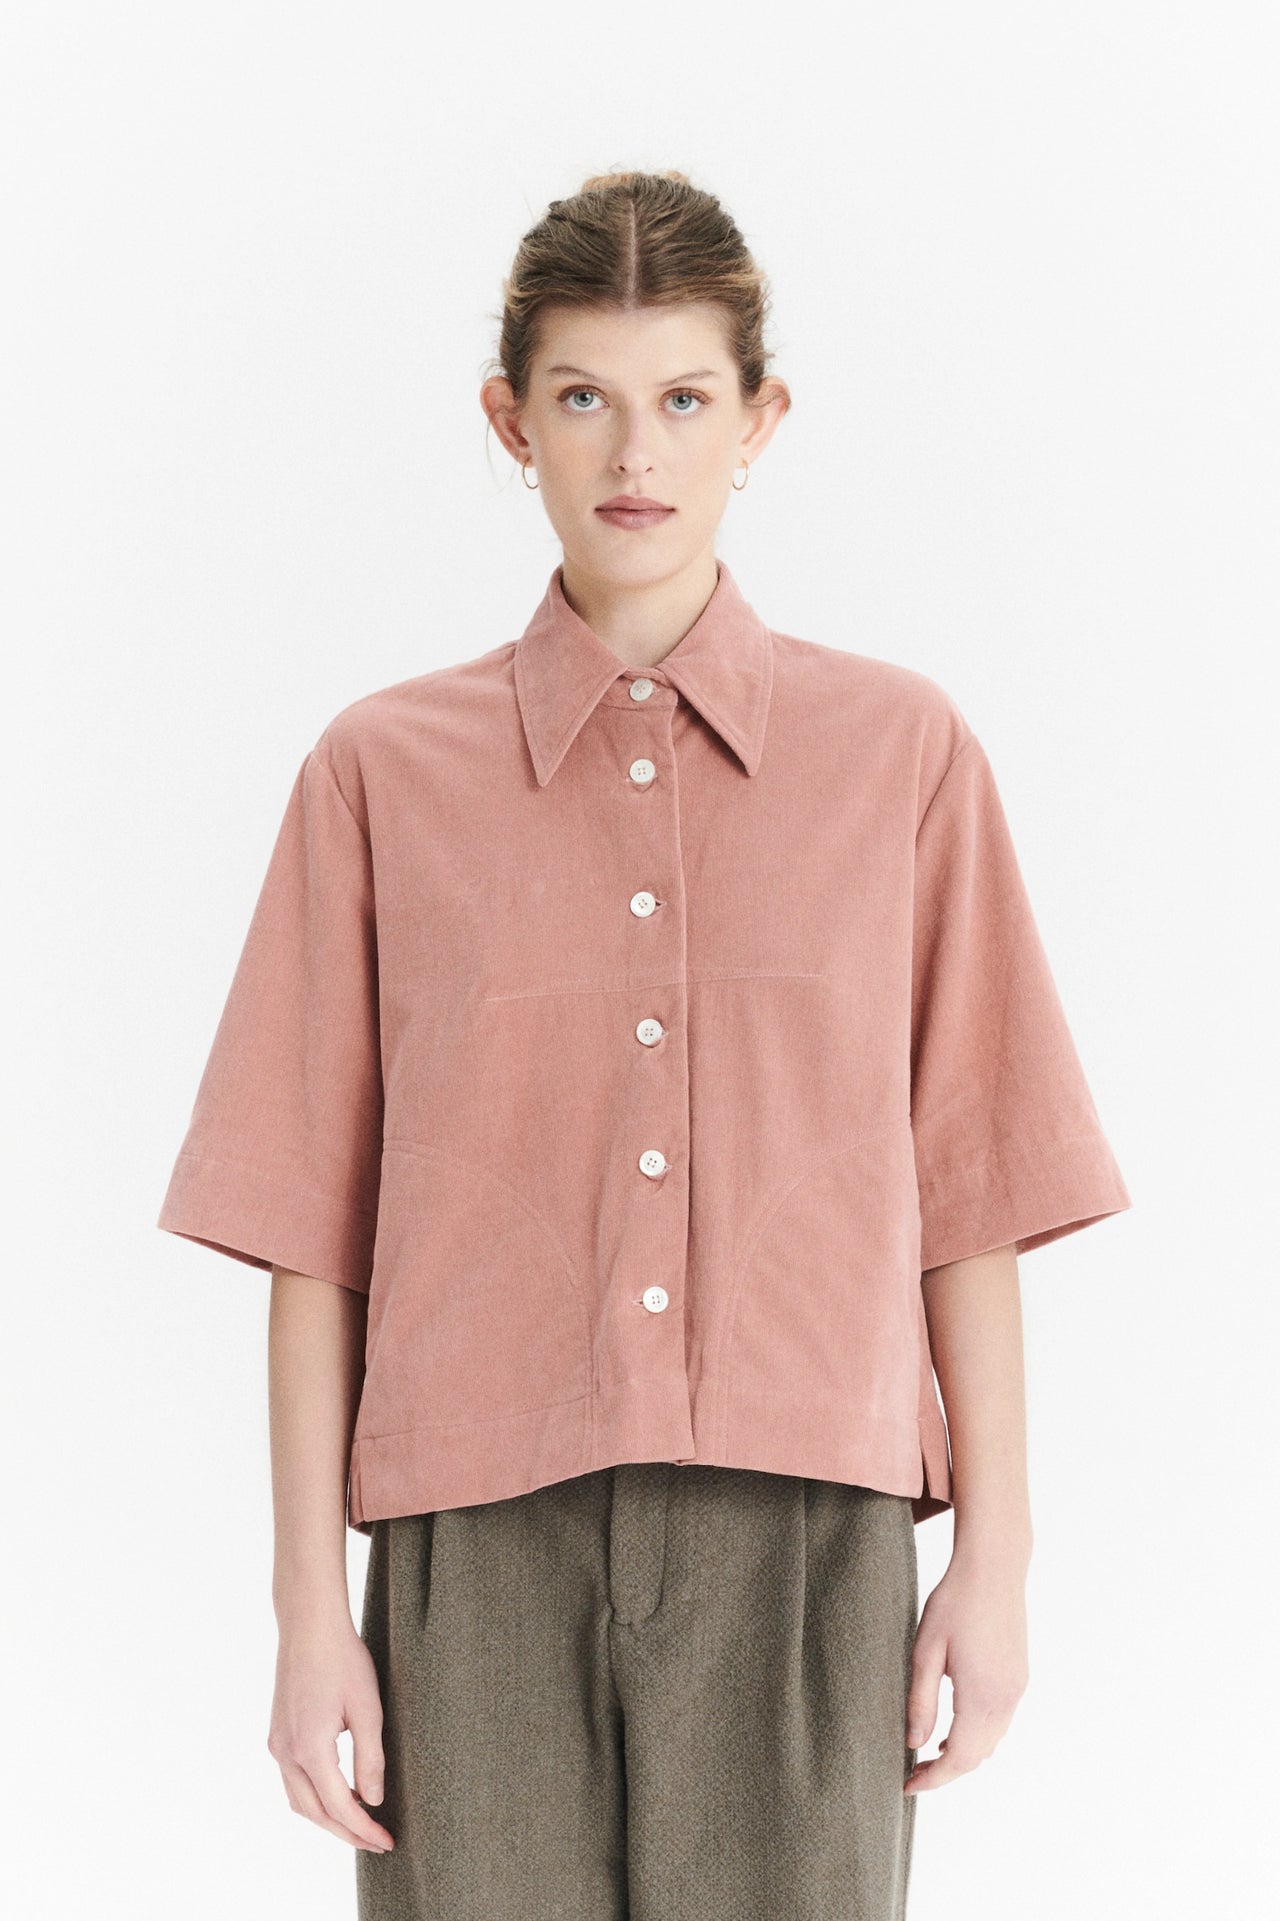 Relaxed Shirt Jacket in a Dusty Pink Japanese Mini Corduroy Cotton